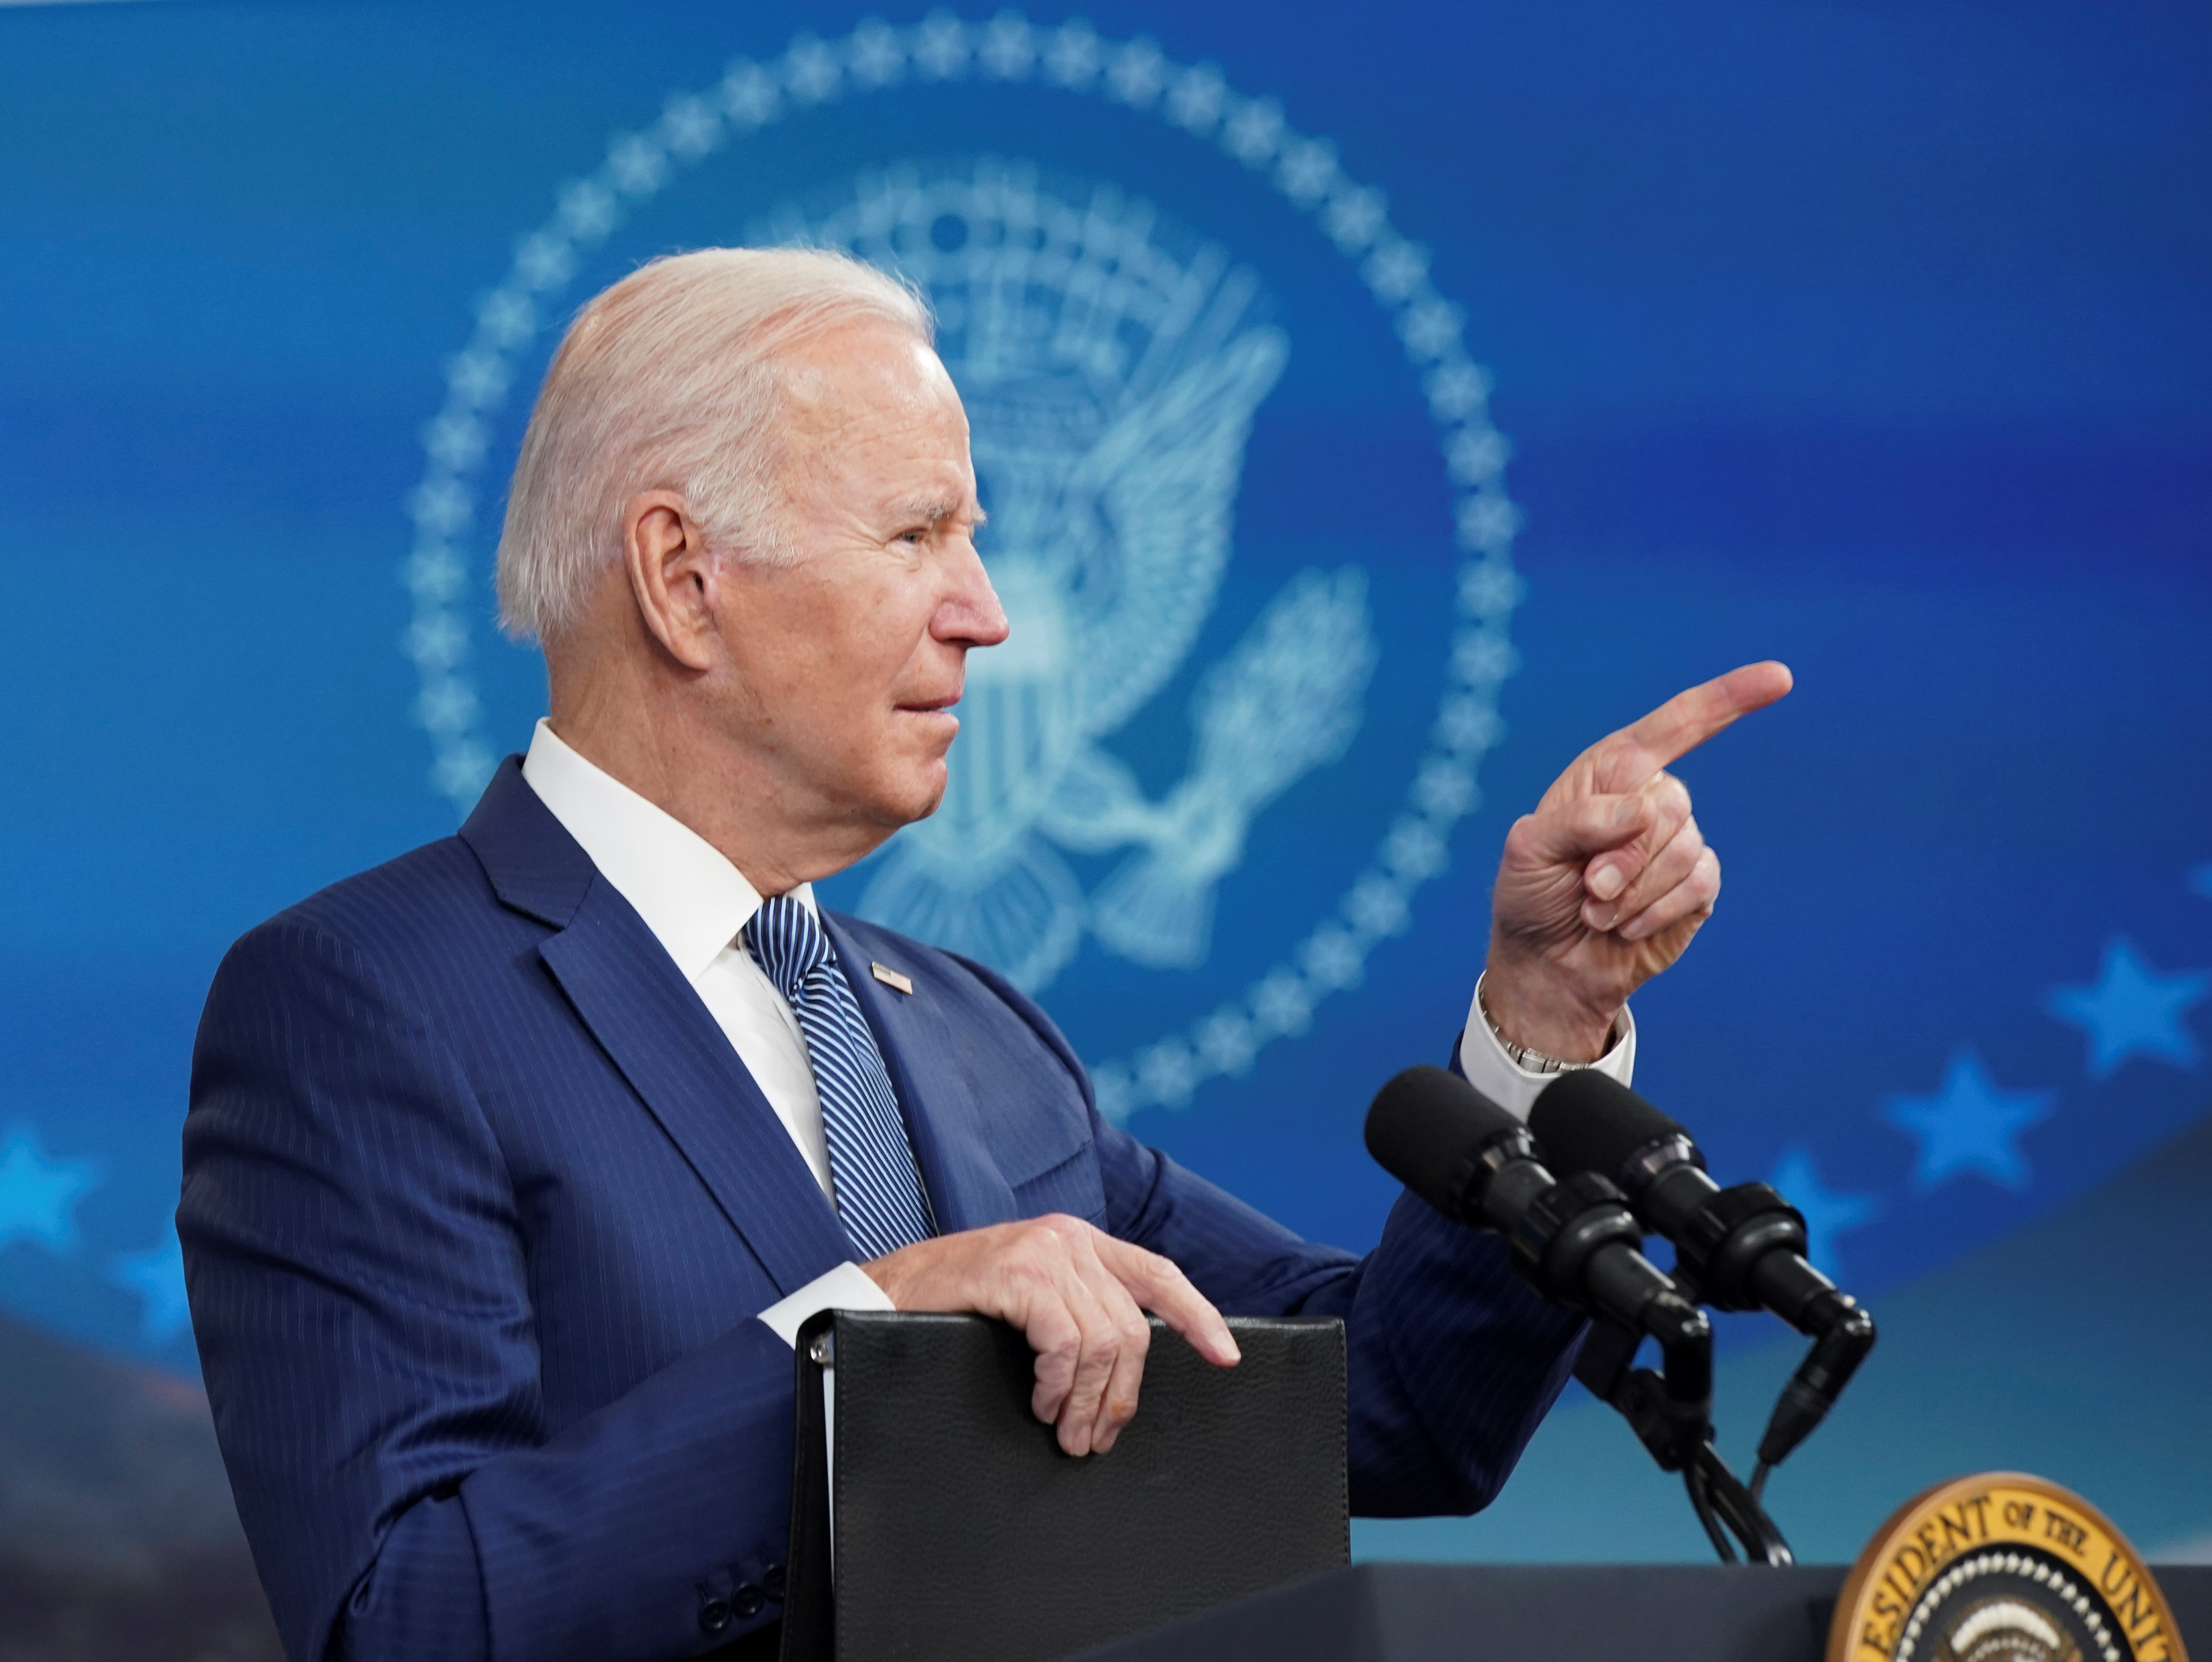 U.S. President Joe Biden points a finger as he speaks about his administration's efforts to ease supply chain issues during the holiday season, at the White House in Washington, U.S., December 1, 2021. REUTERS/Kevin Lamarque